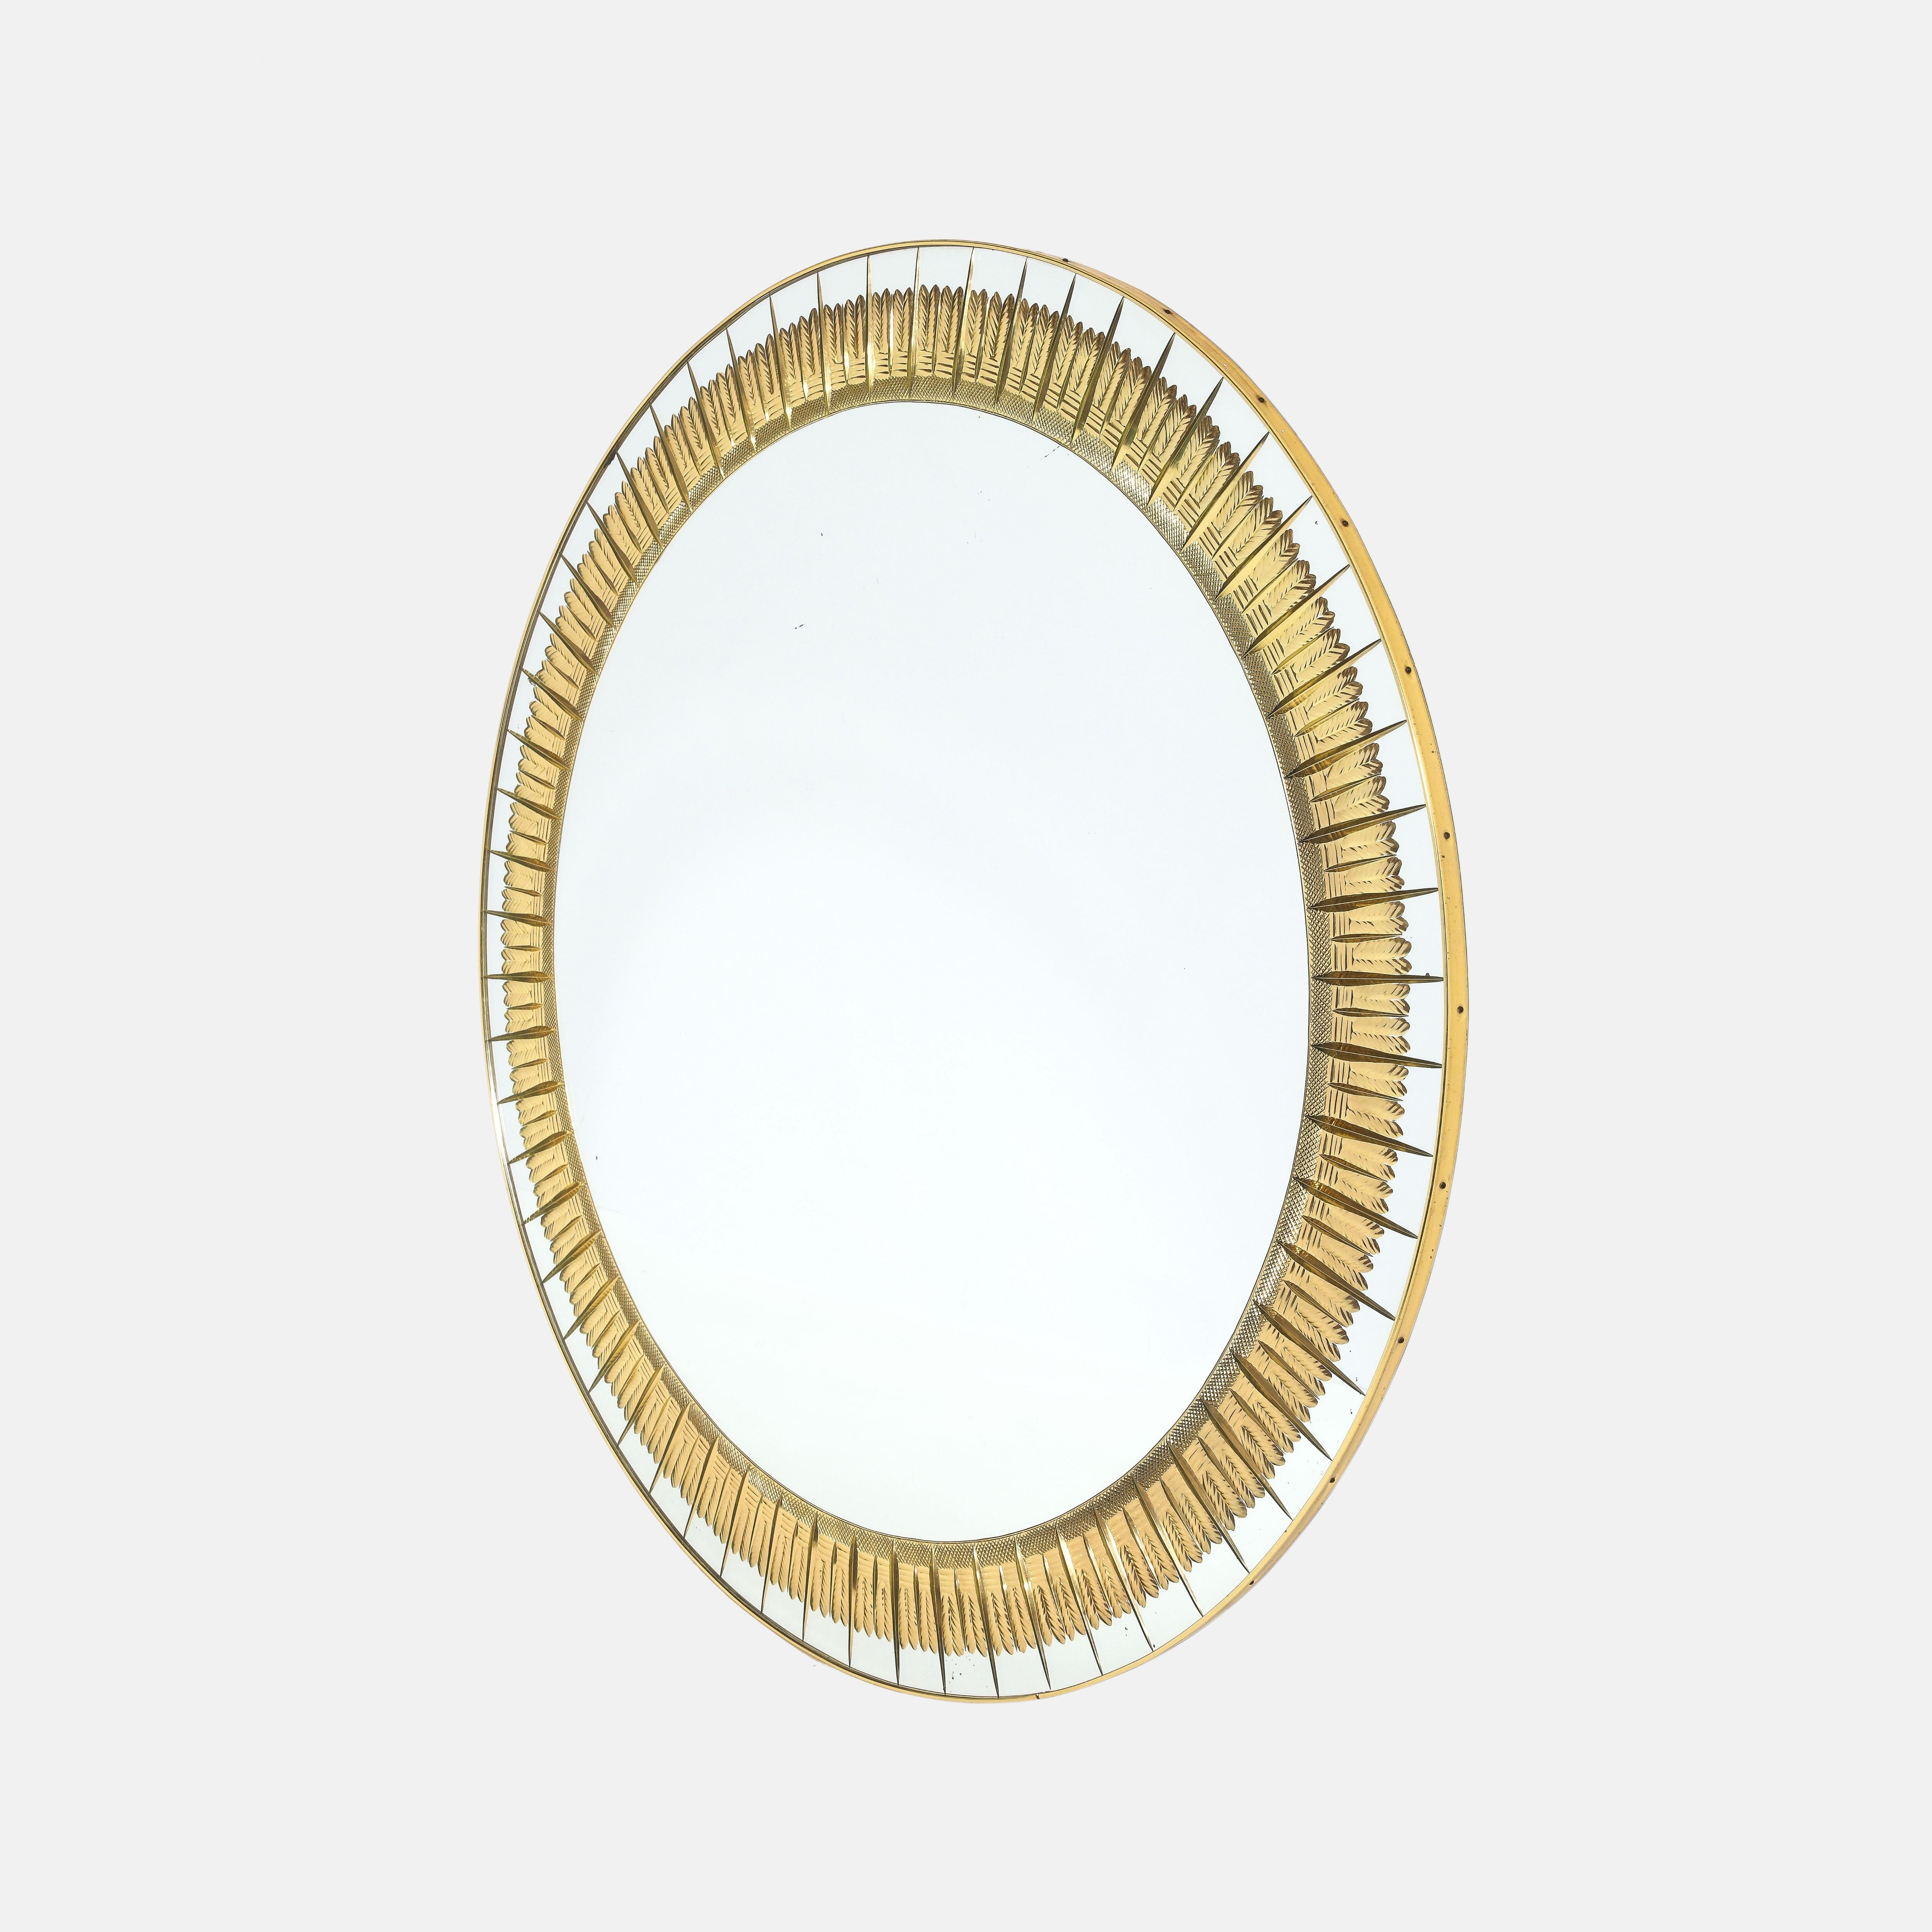 Cristal Art rare large round intricately engraved and gilded pressed glass wall mirror, Italy, 1960s.  This exquisite mirror has a lovely mirrored glass border composed of a beautifully designed Bohemian-type pattern with scroll-engraved and gilded